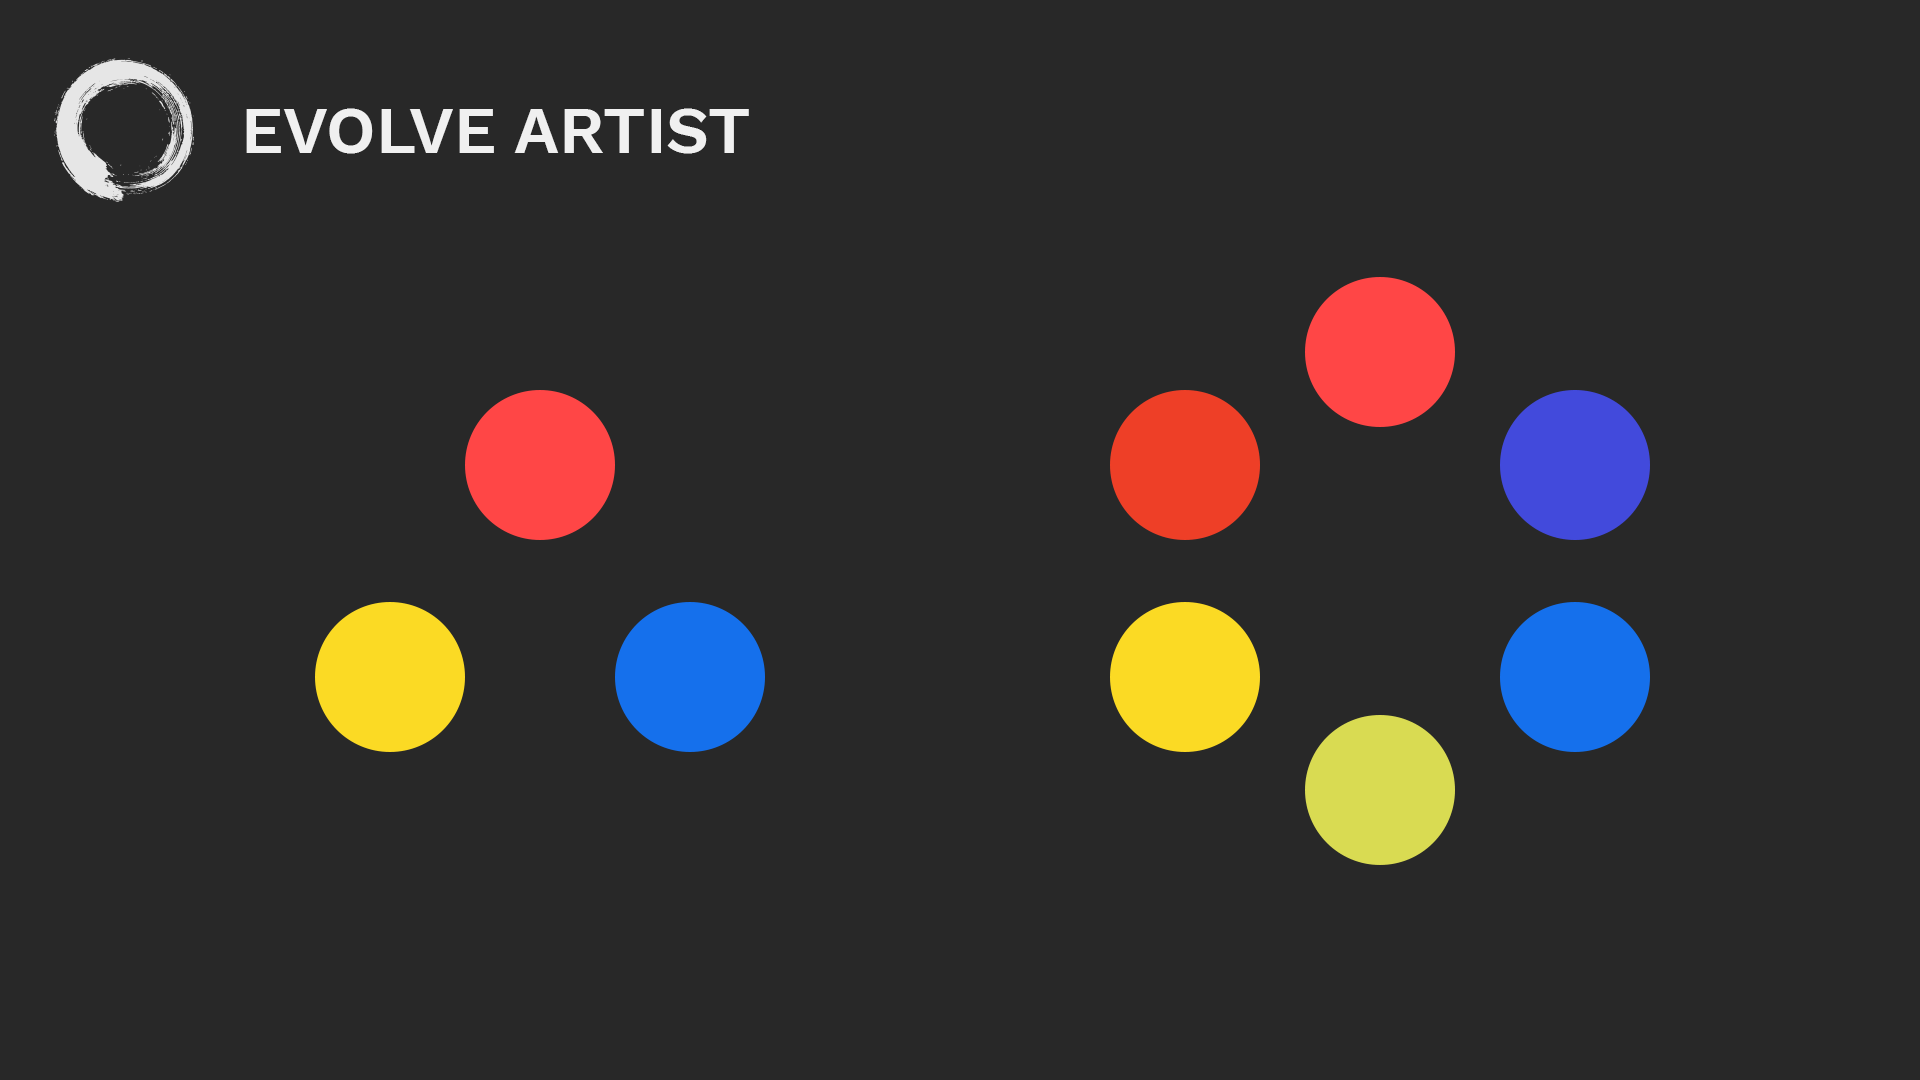 Evolve Artists uses six colors, three warm and three cool